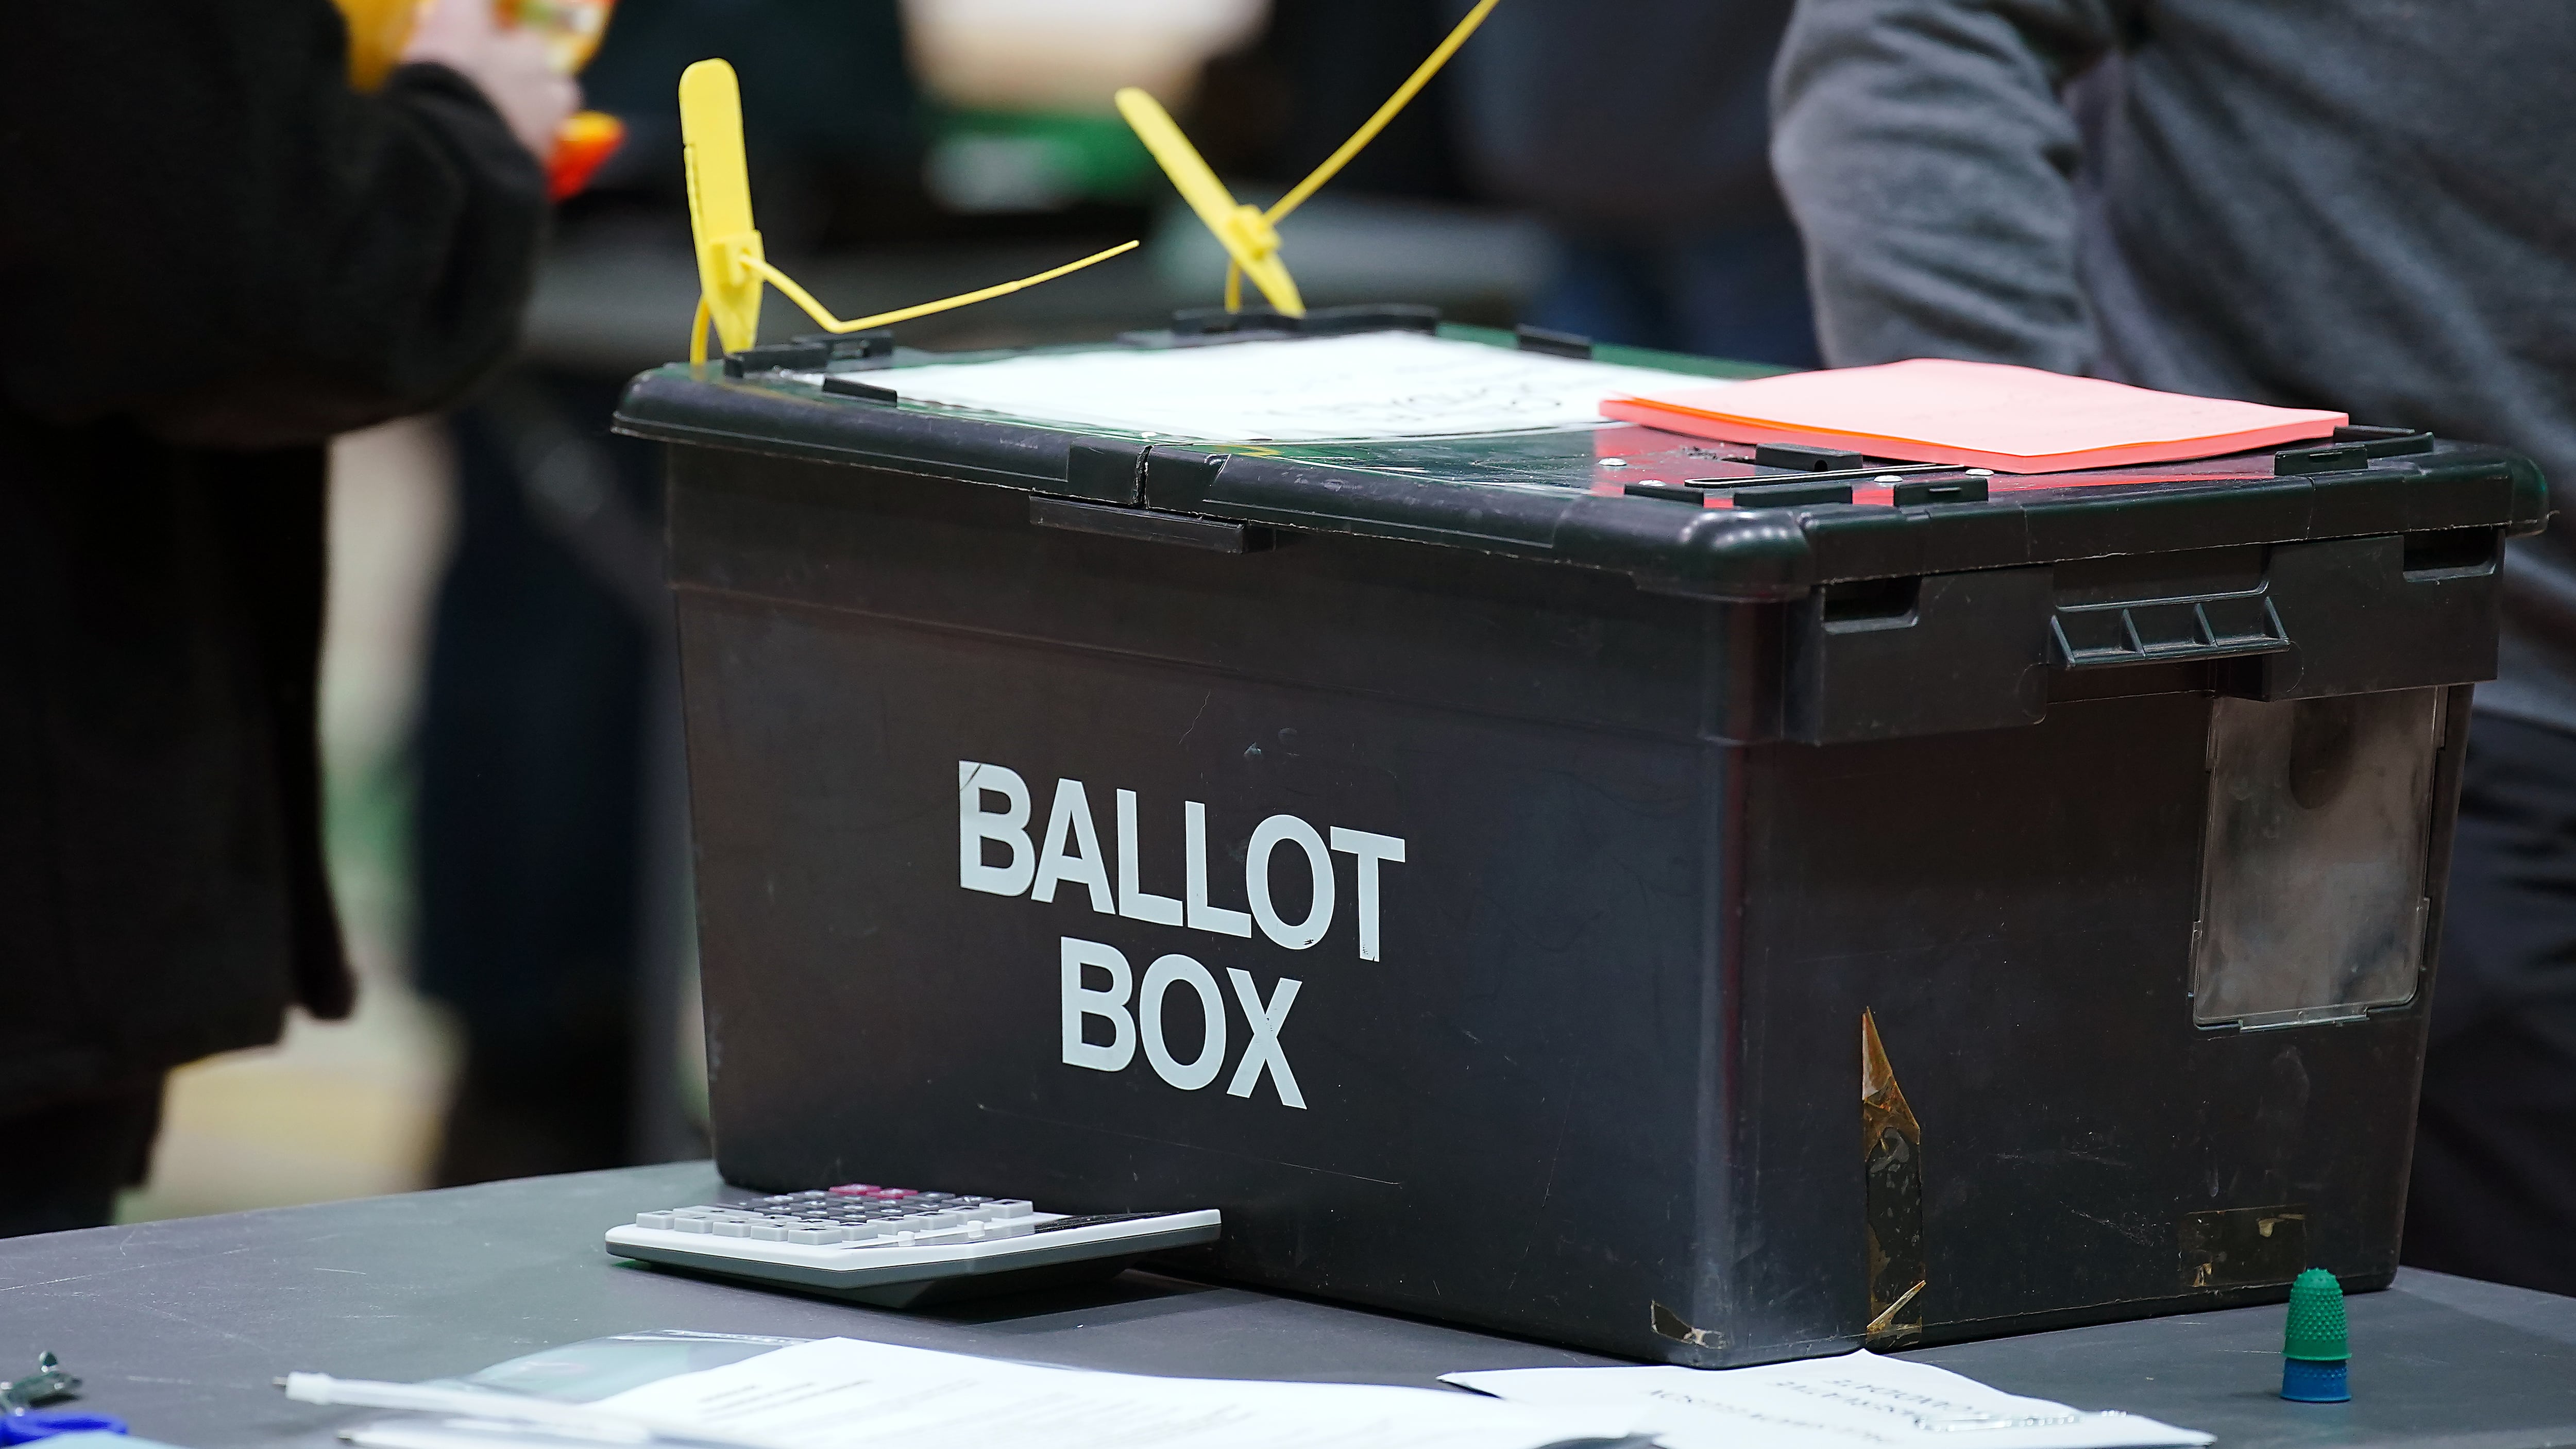 Edinburgh Council has set up an emergency centre to allow voters to receive their ballot papers